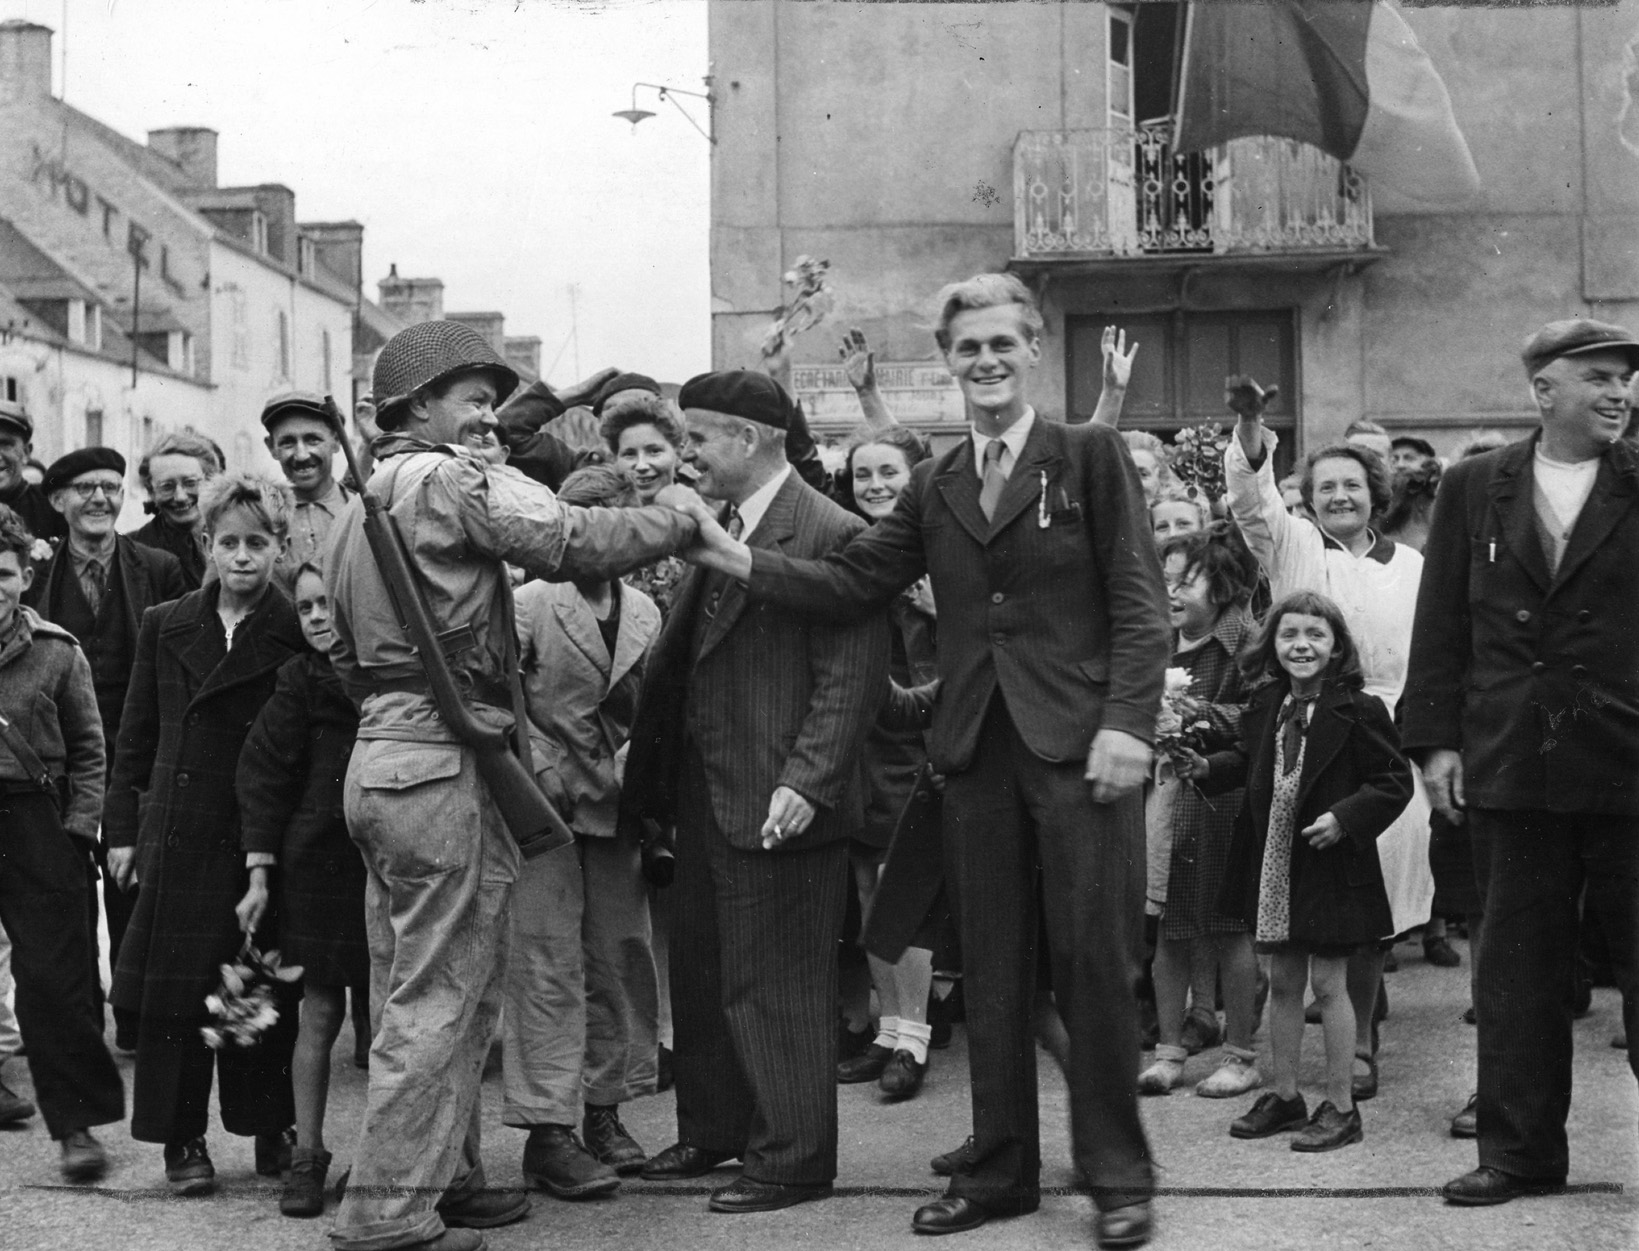 The mayor of Barneville, wearing a beret, greets an American sergeant while jubilant residents wave flowers.